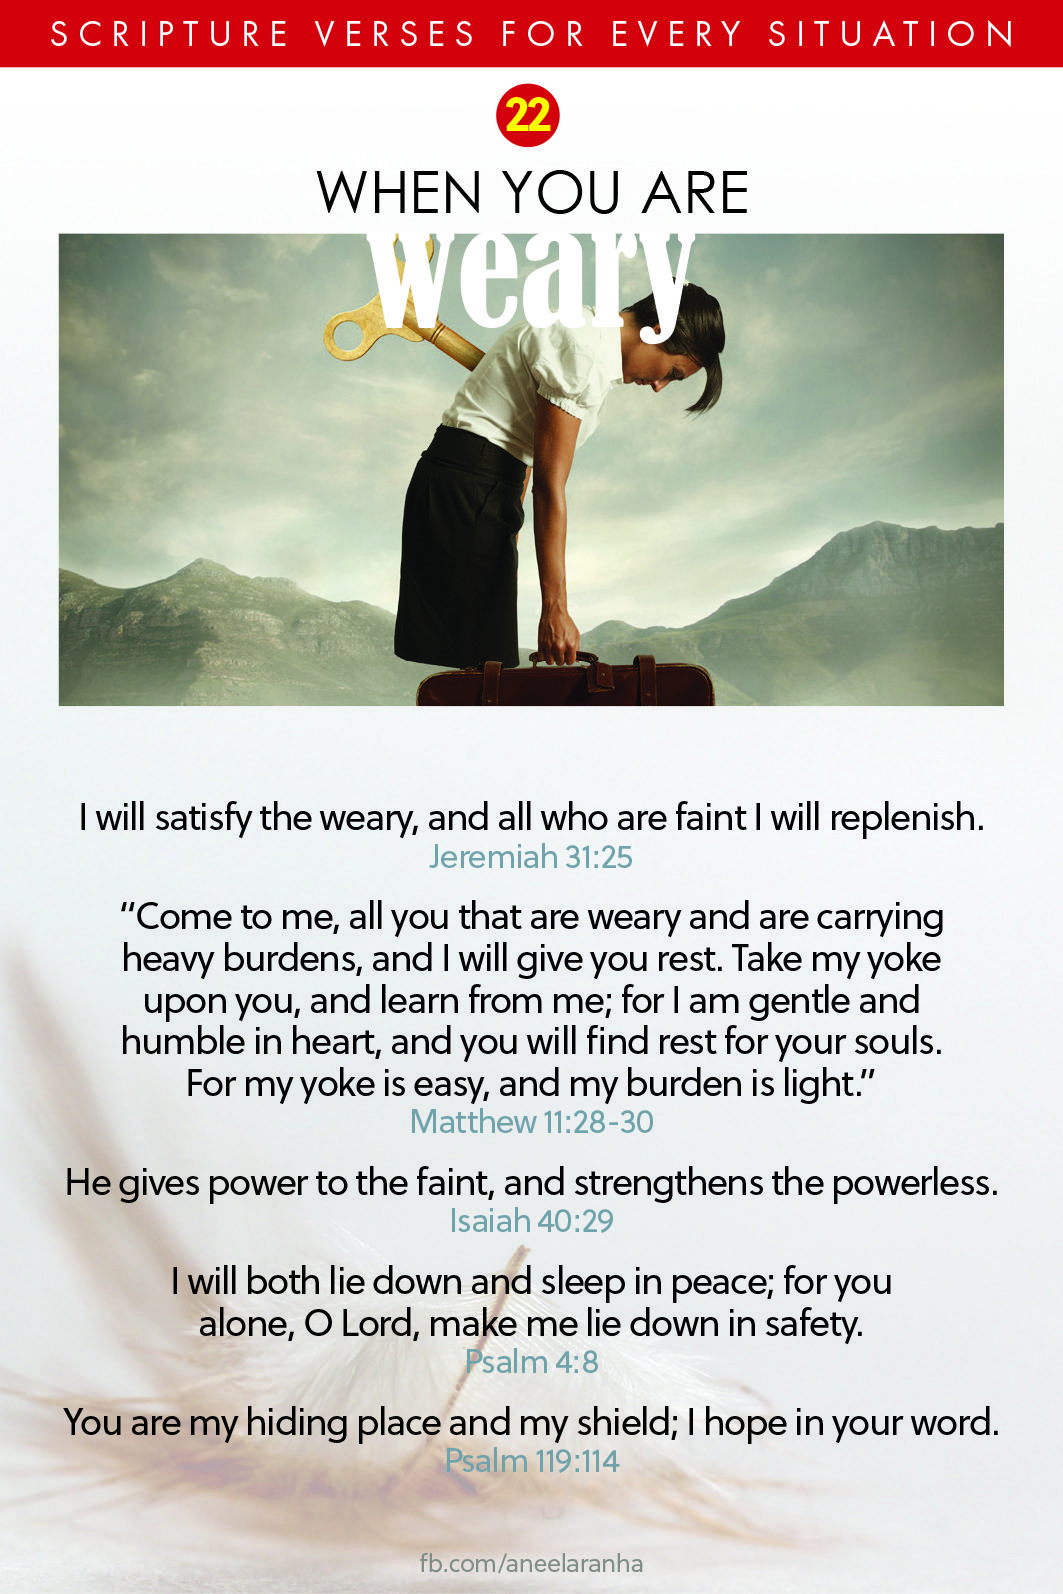 22. Are you weary?